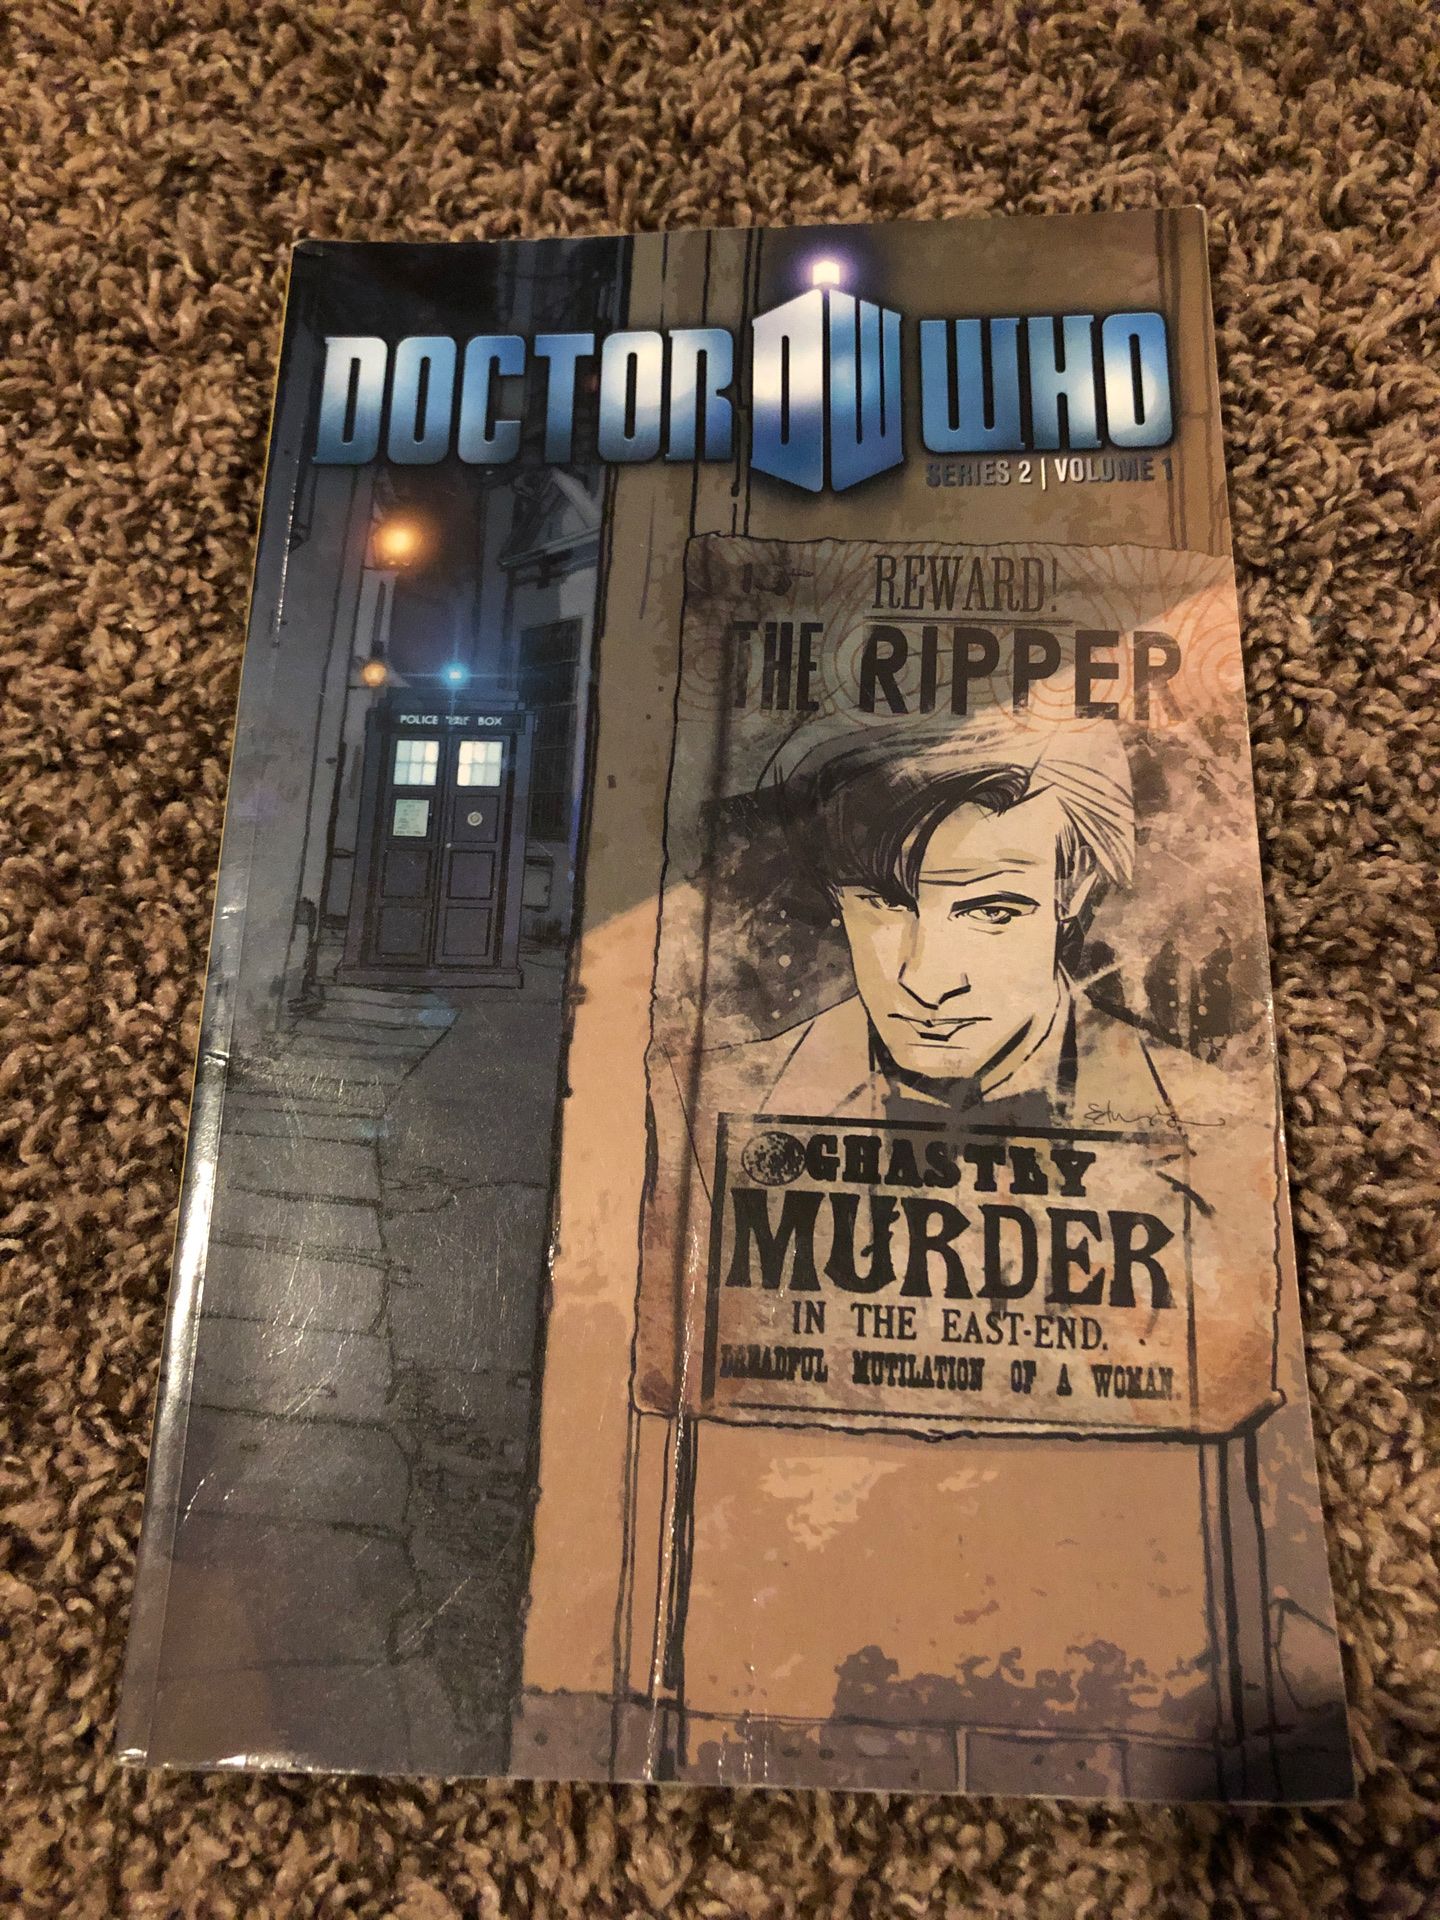 Doctor Who - The Ripper (Series 2: Vol. 1)